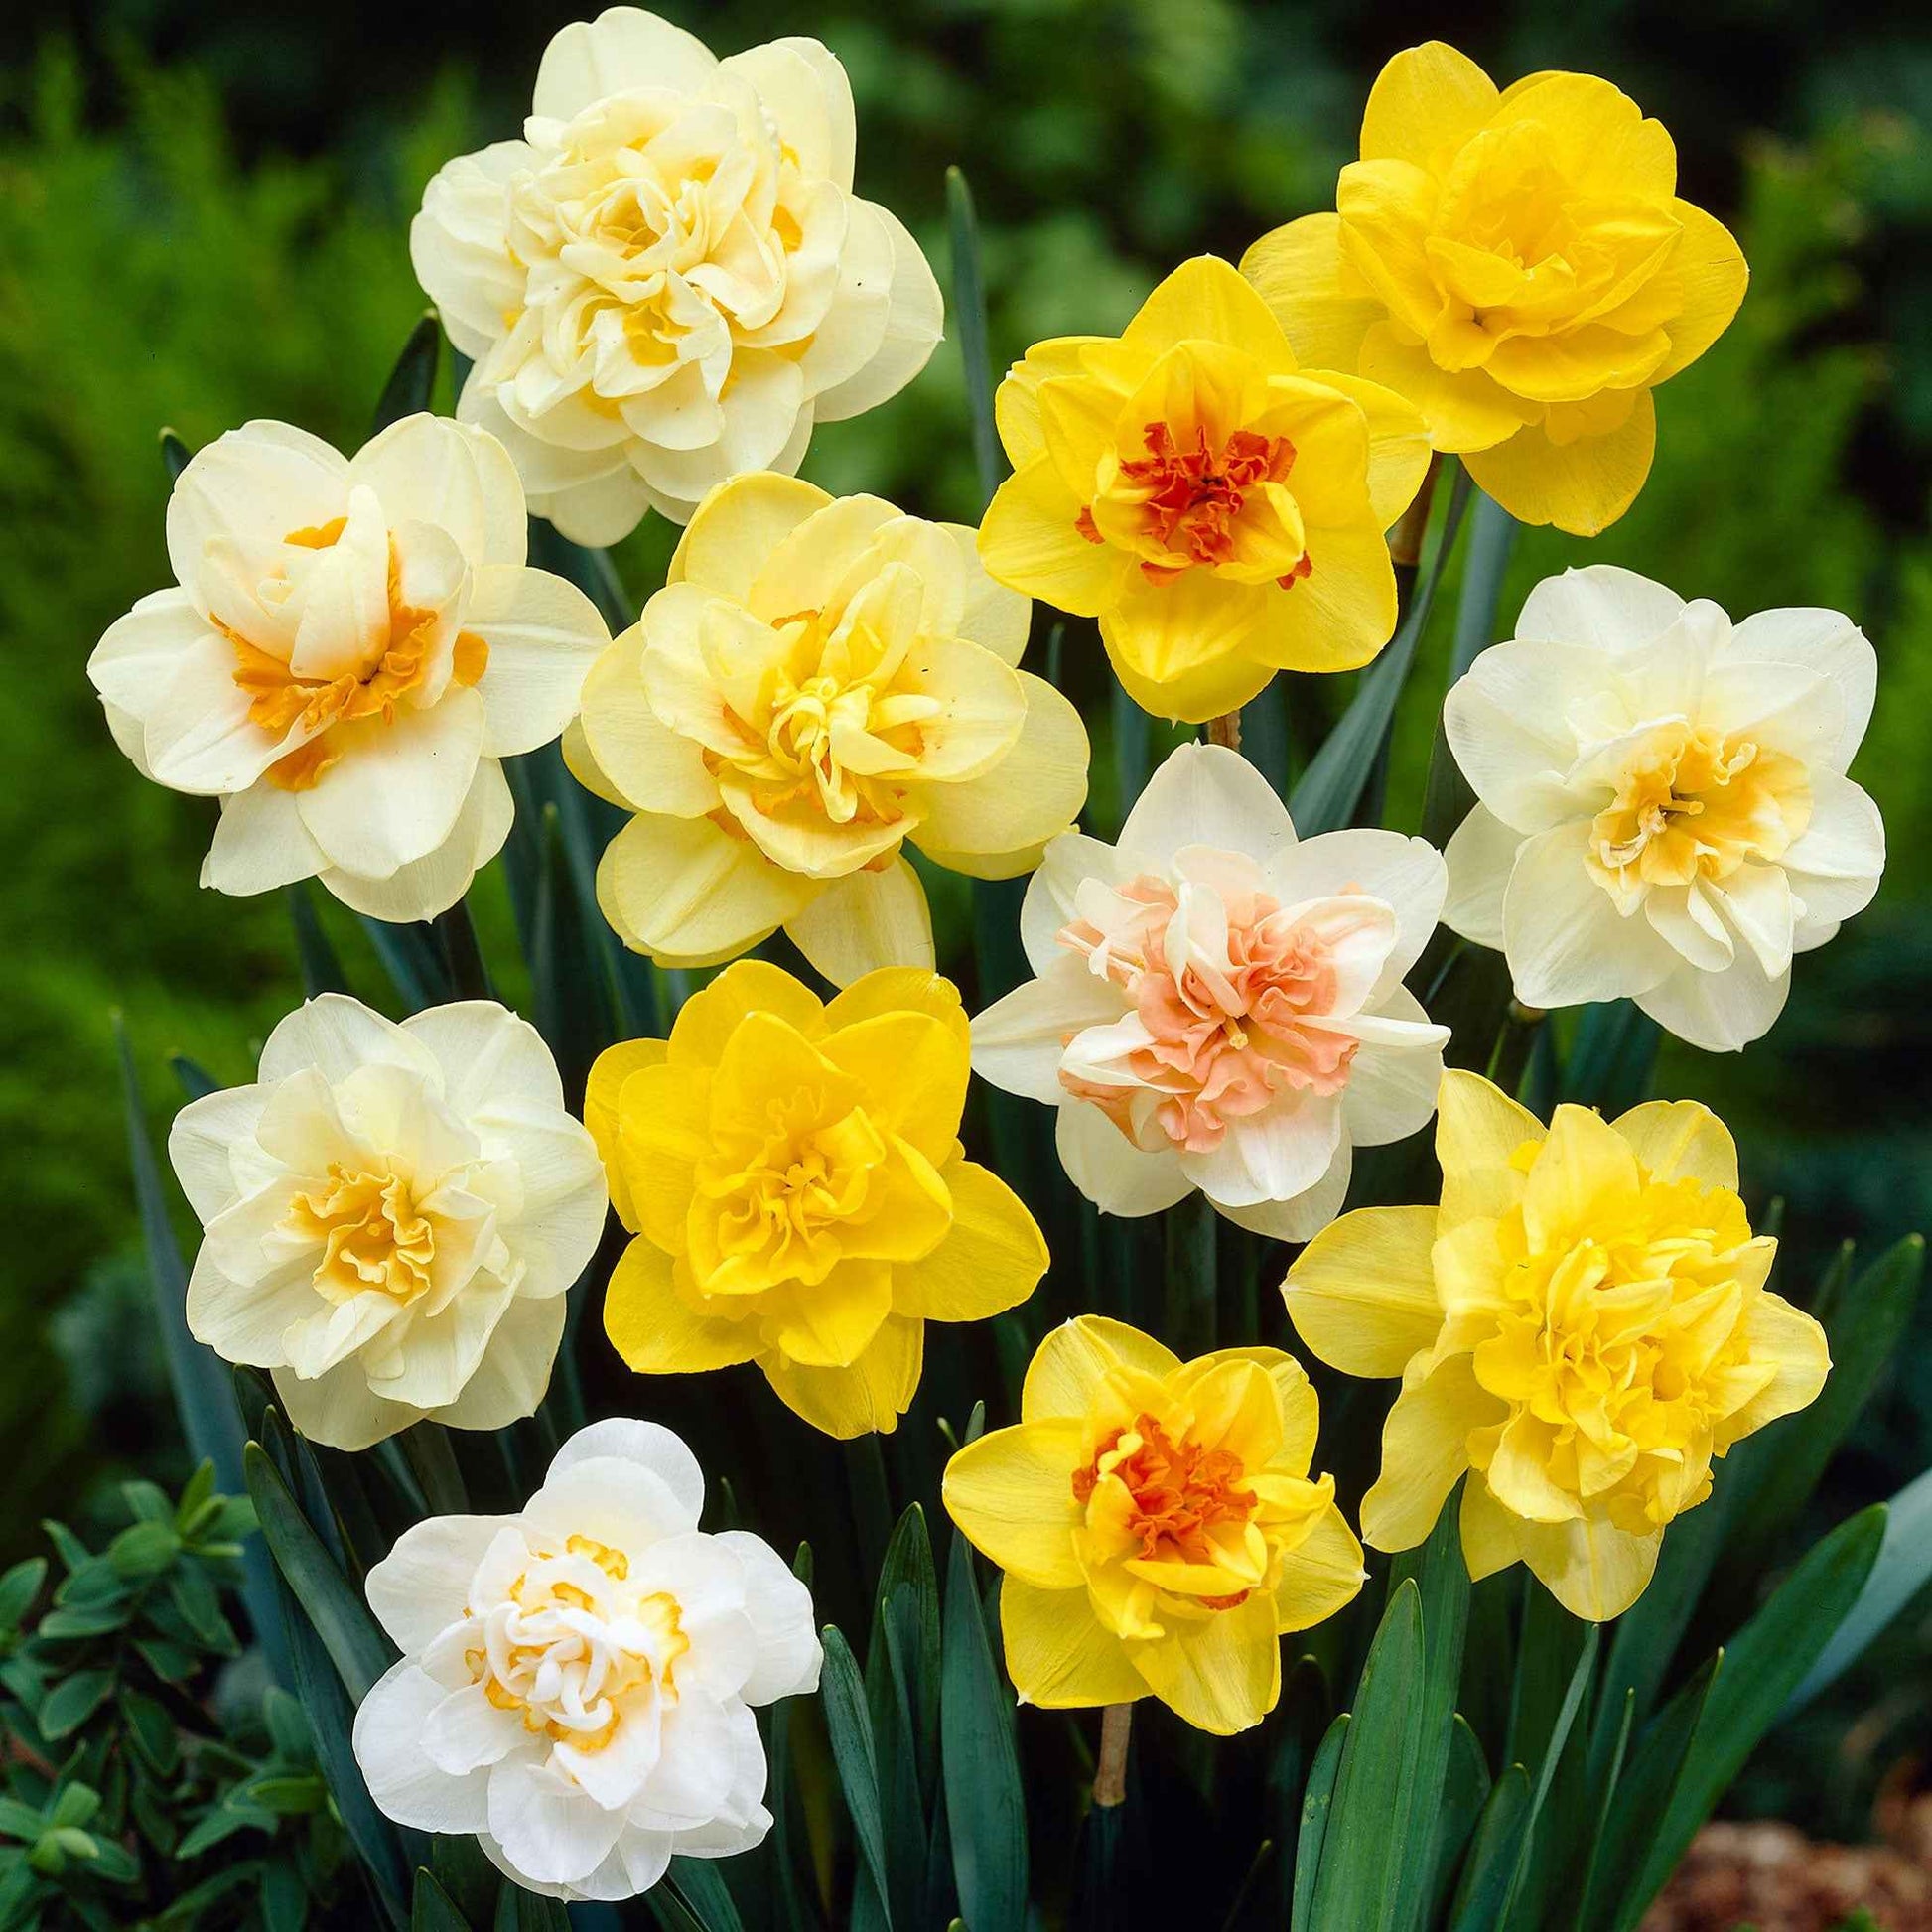 10x Narcis Narcissus - Mix Double Trouble - Alle populaire bloembollen